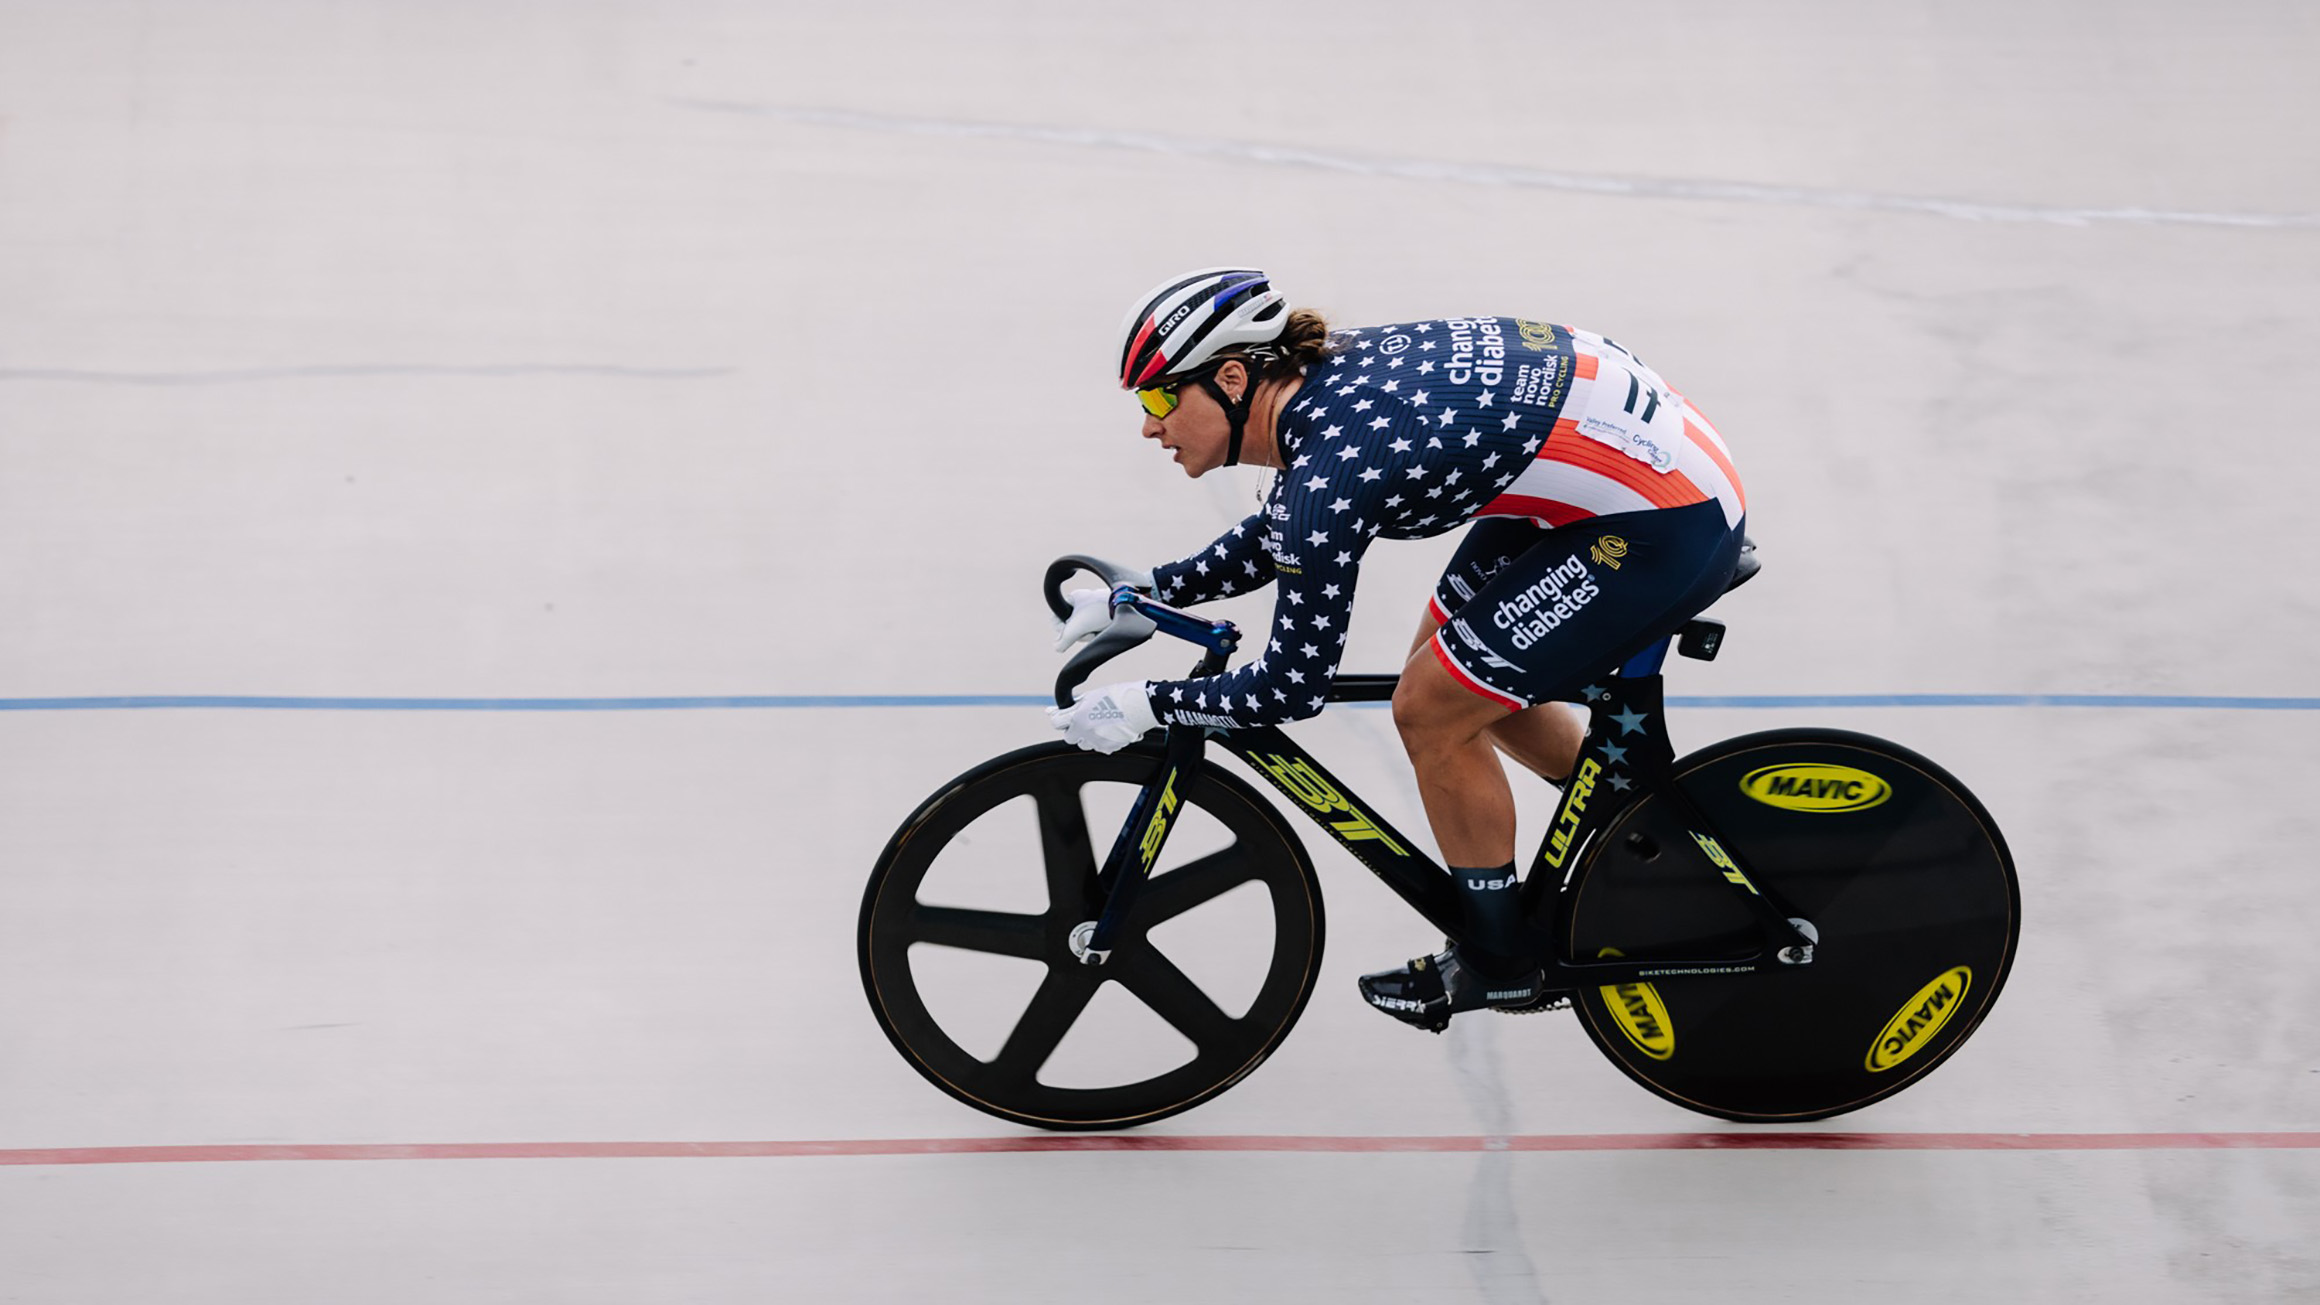 A woman on a bicycle races down a track.